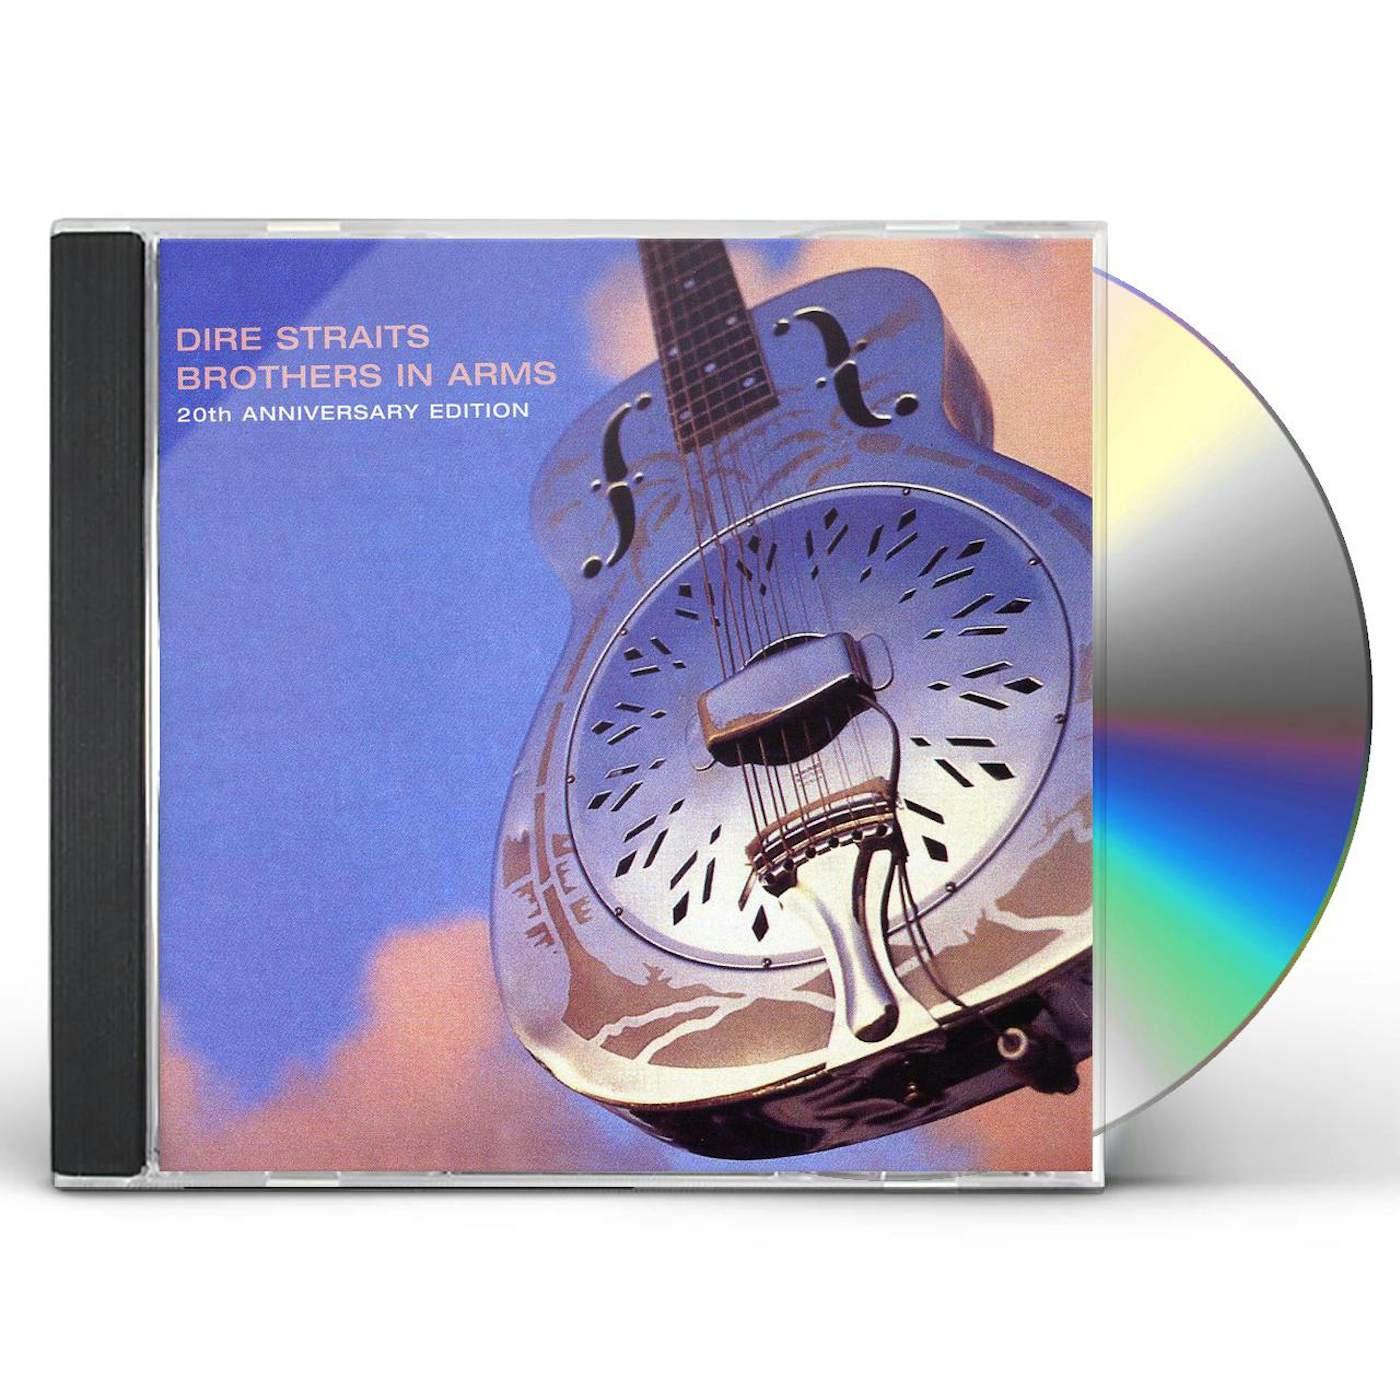 Dire Straits BROTHERS IN ARMS Super Audio CD